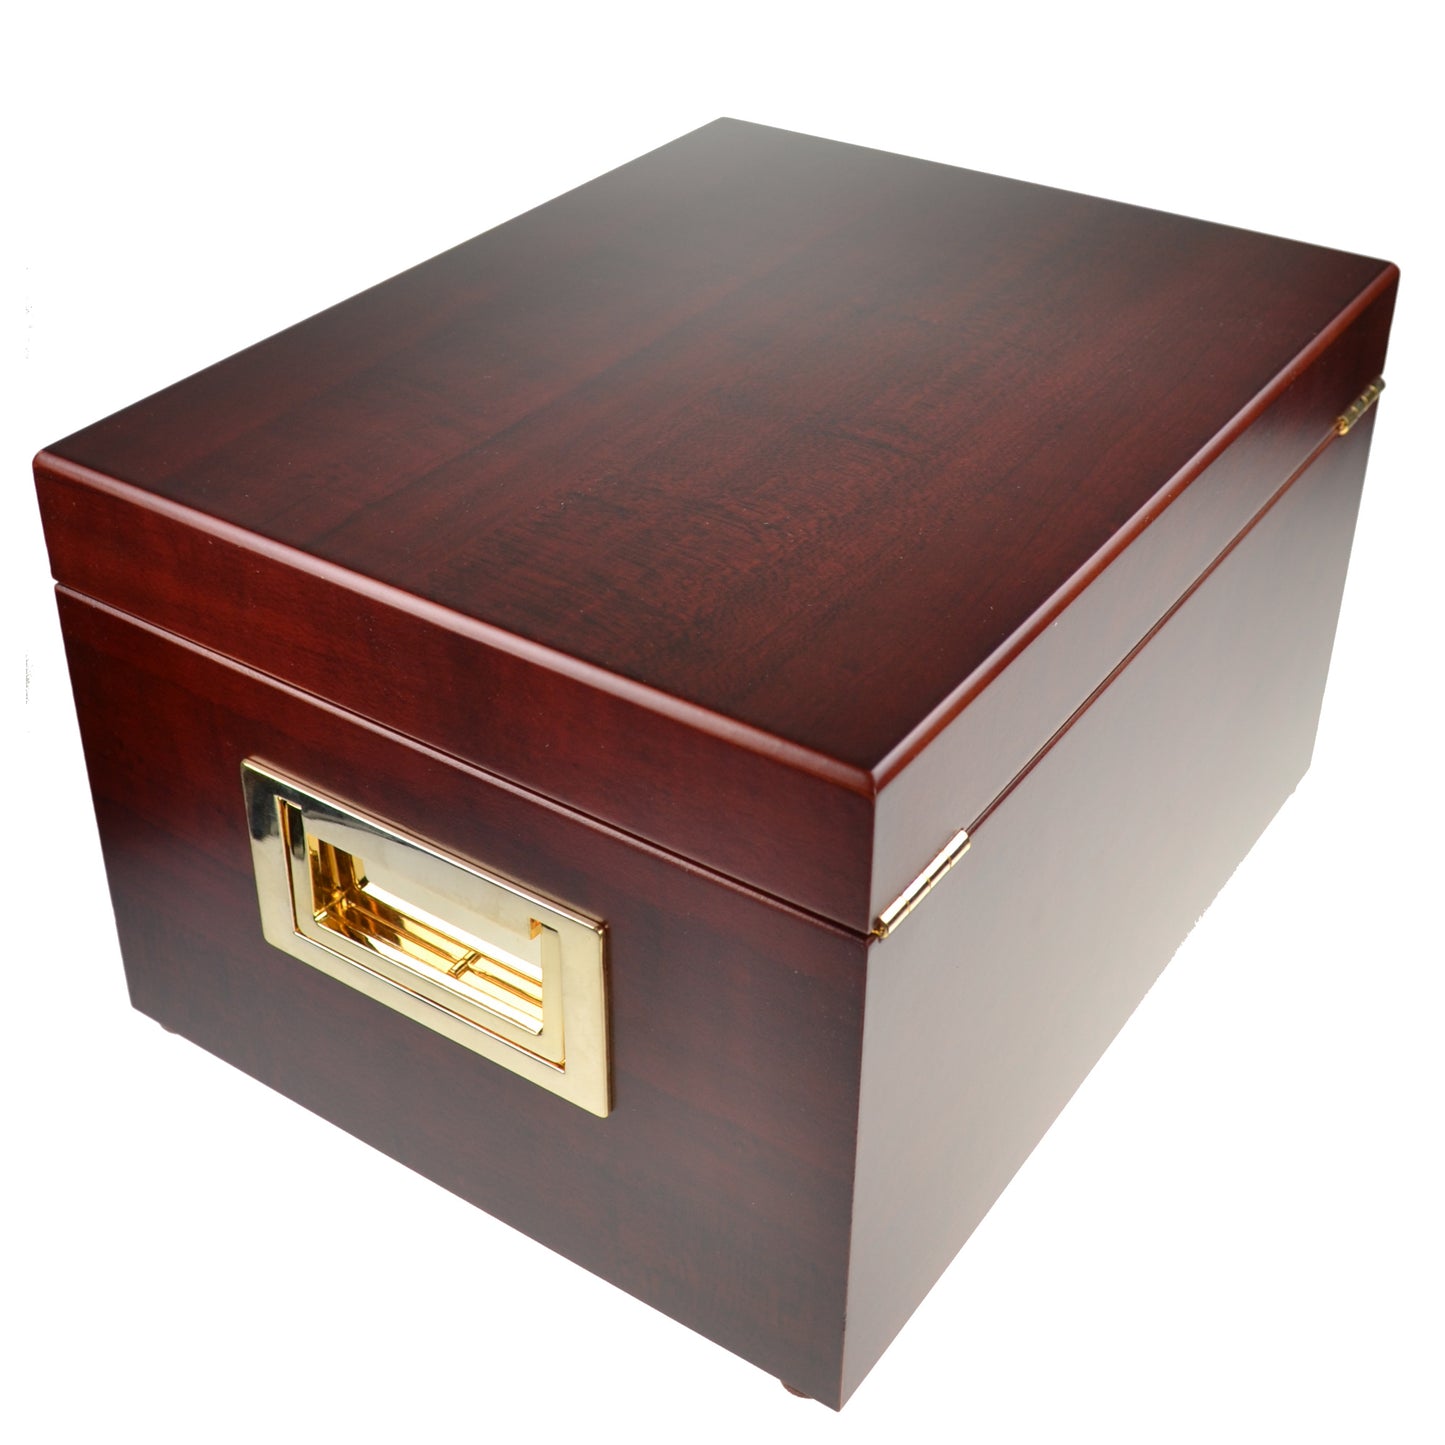 Valet box in Cherry with contents